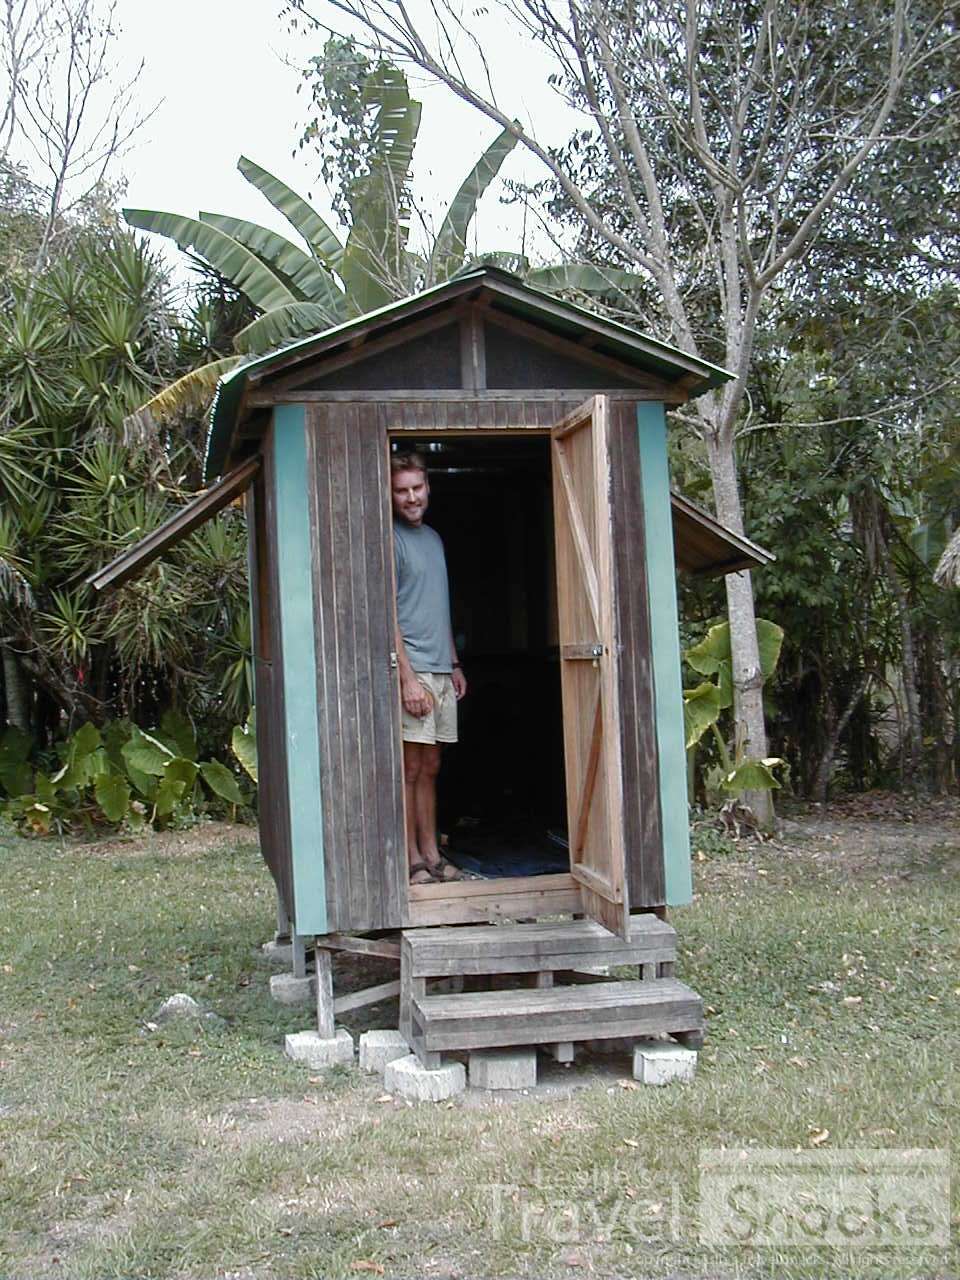 This is by far, the tiniest hotel room EVER. This is not an outhouse, it is the room we paid for at the entrance to Tikal so we could get up early and beat the crowds.